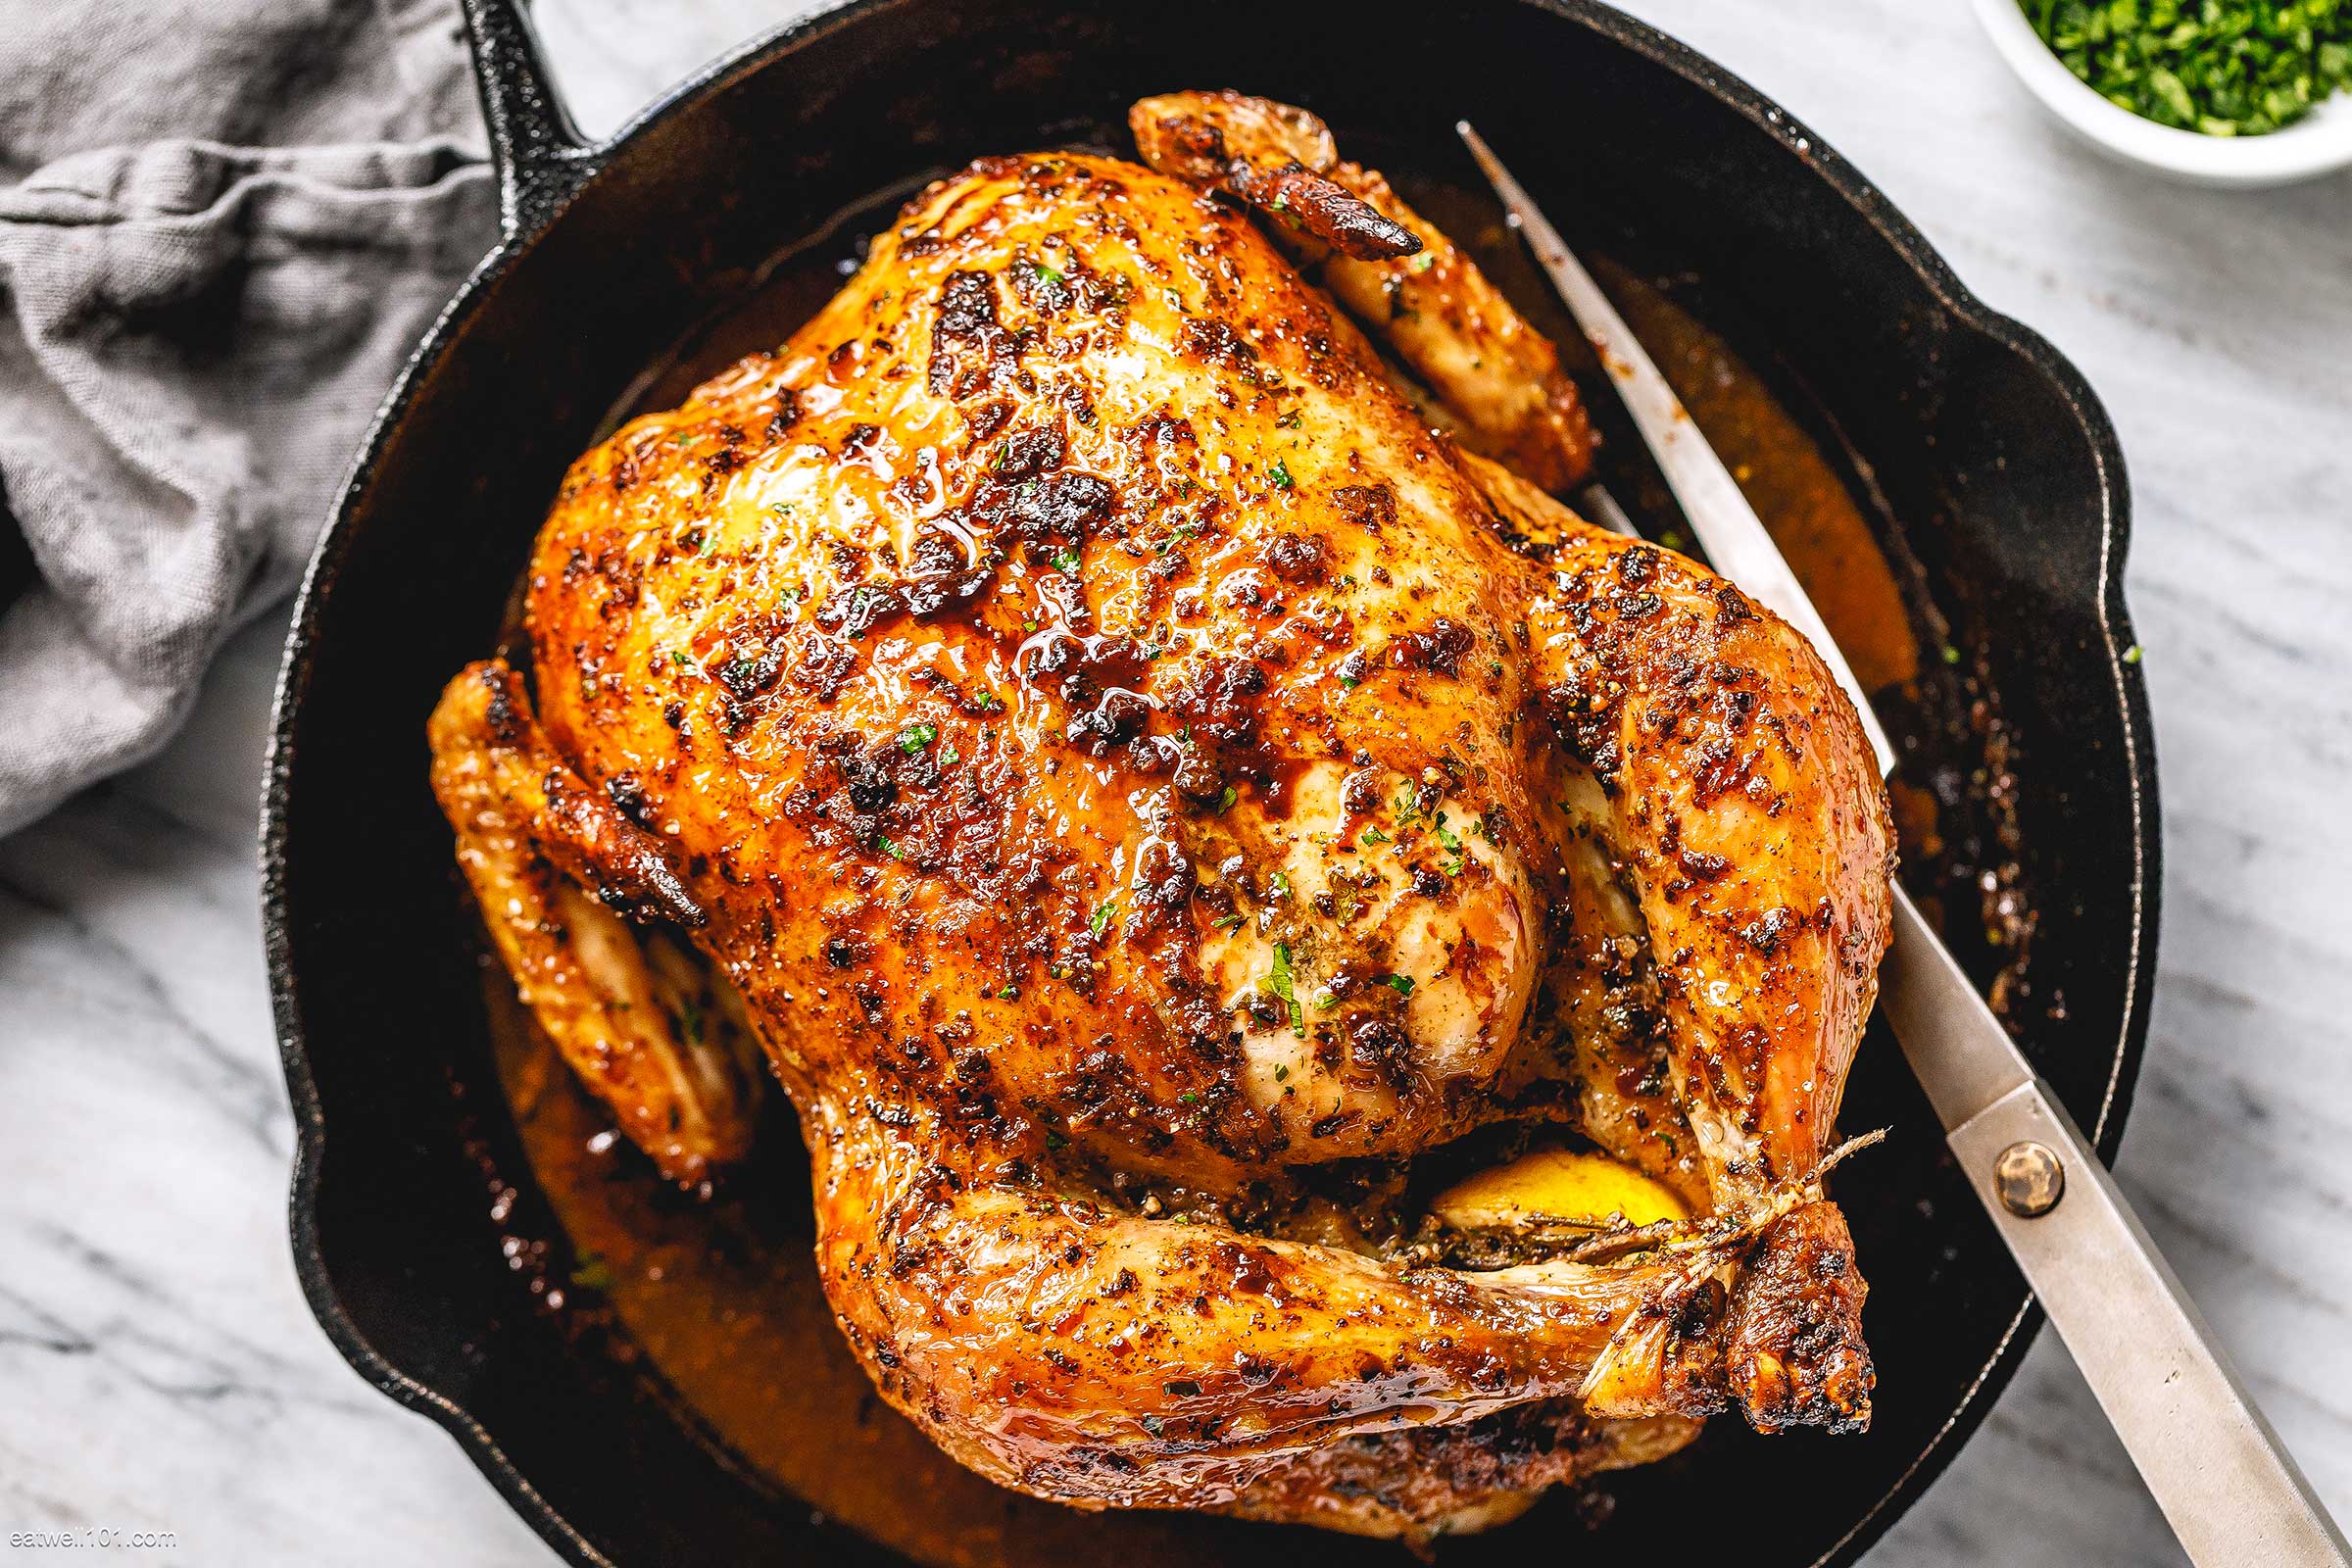 Roasted Chicken Recipe with Garlic Herb Butter – Whole Roasted Chicken